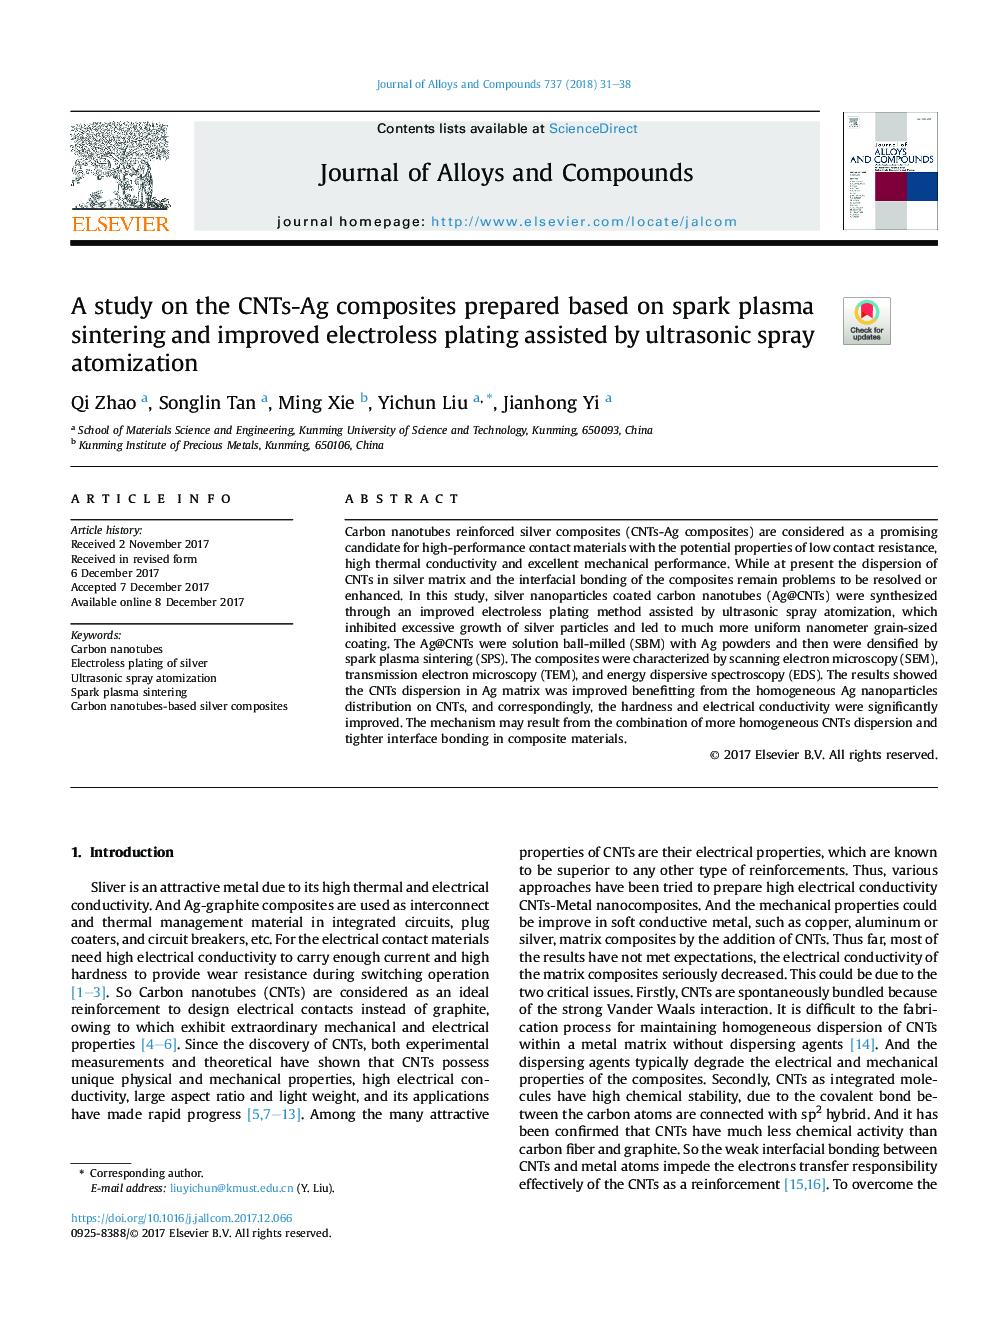 A study on the CNTs-Ag composites prepared based on spark plasma sintering and improved electroless plating assisted by ultrasonic spray atomization